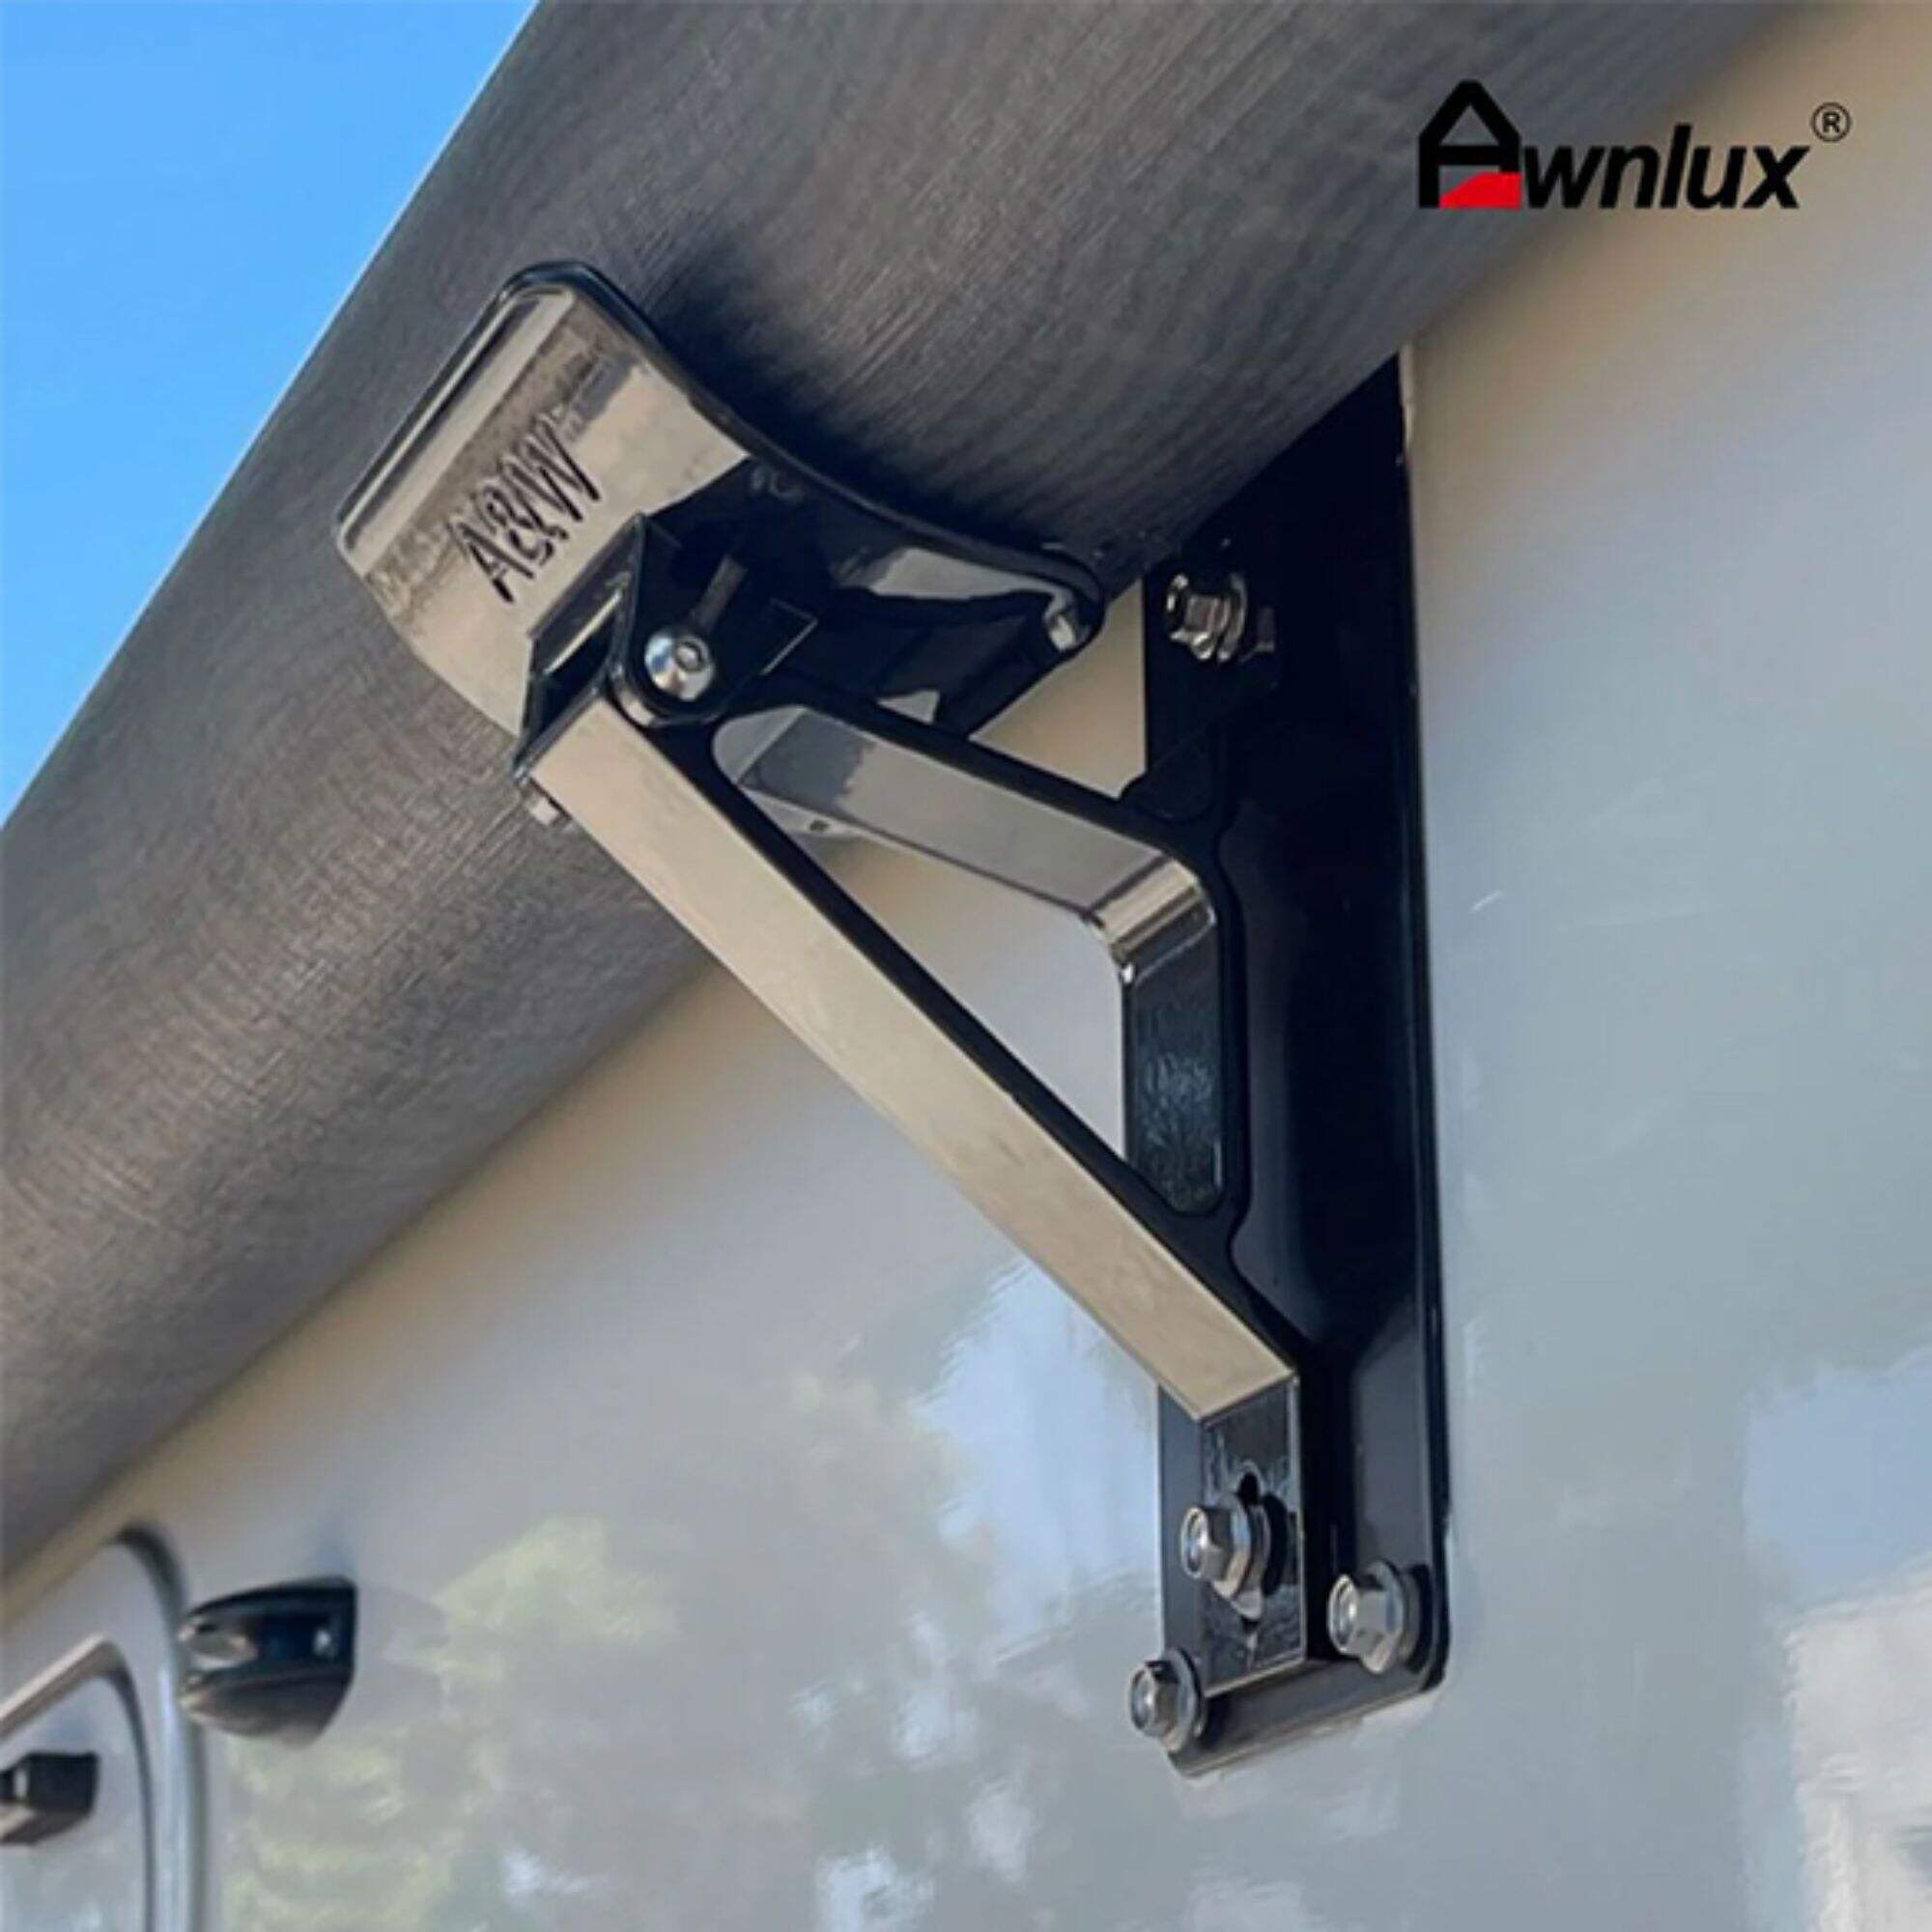 Awning roller cradle